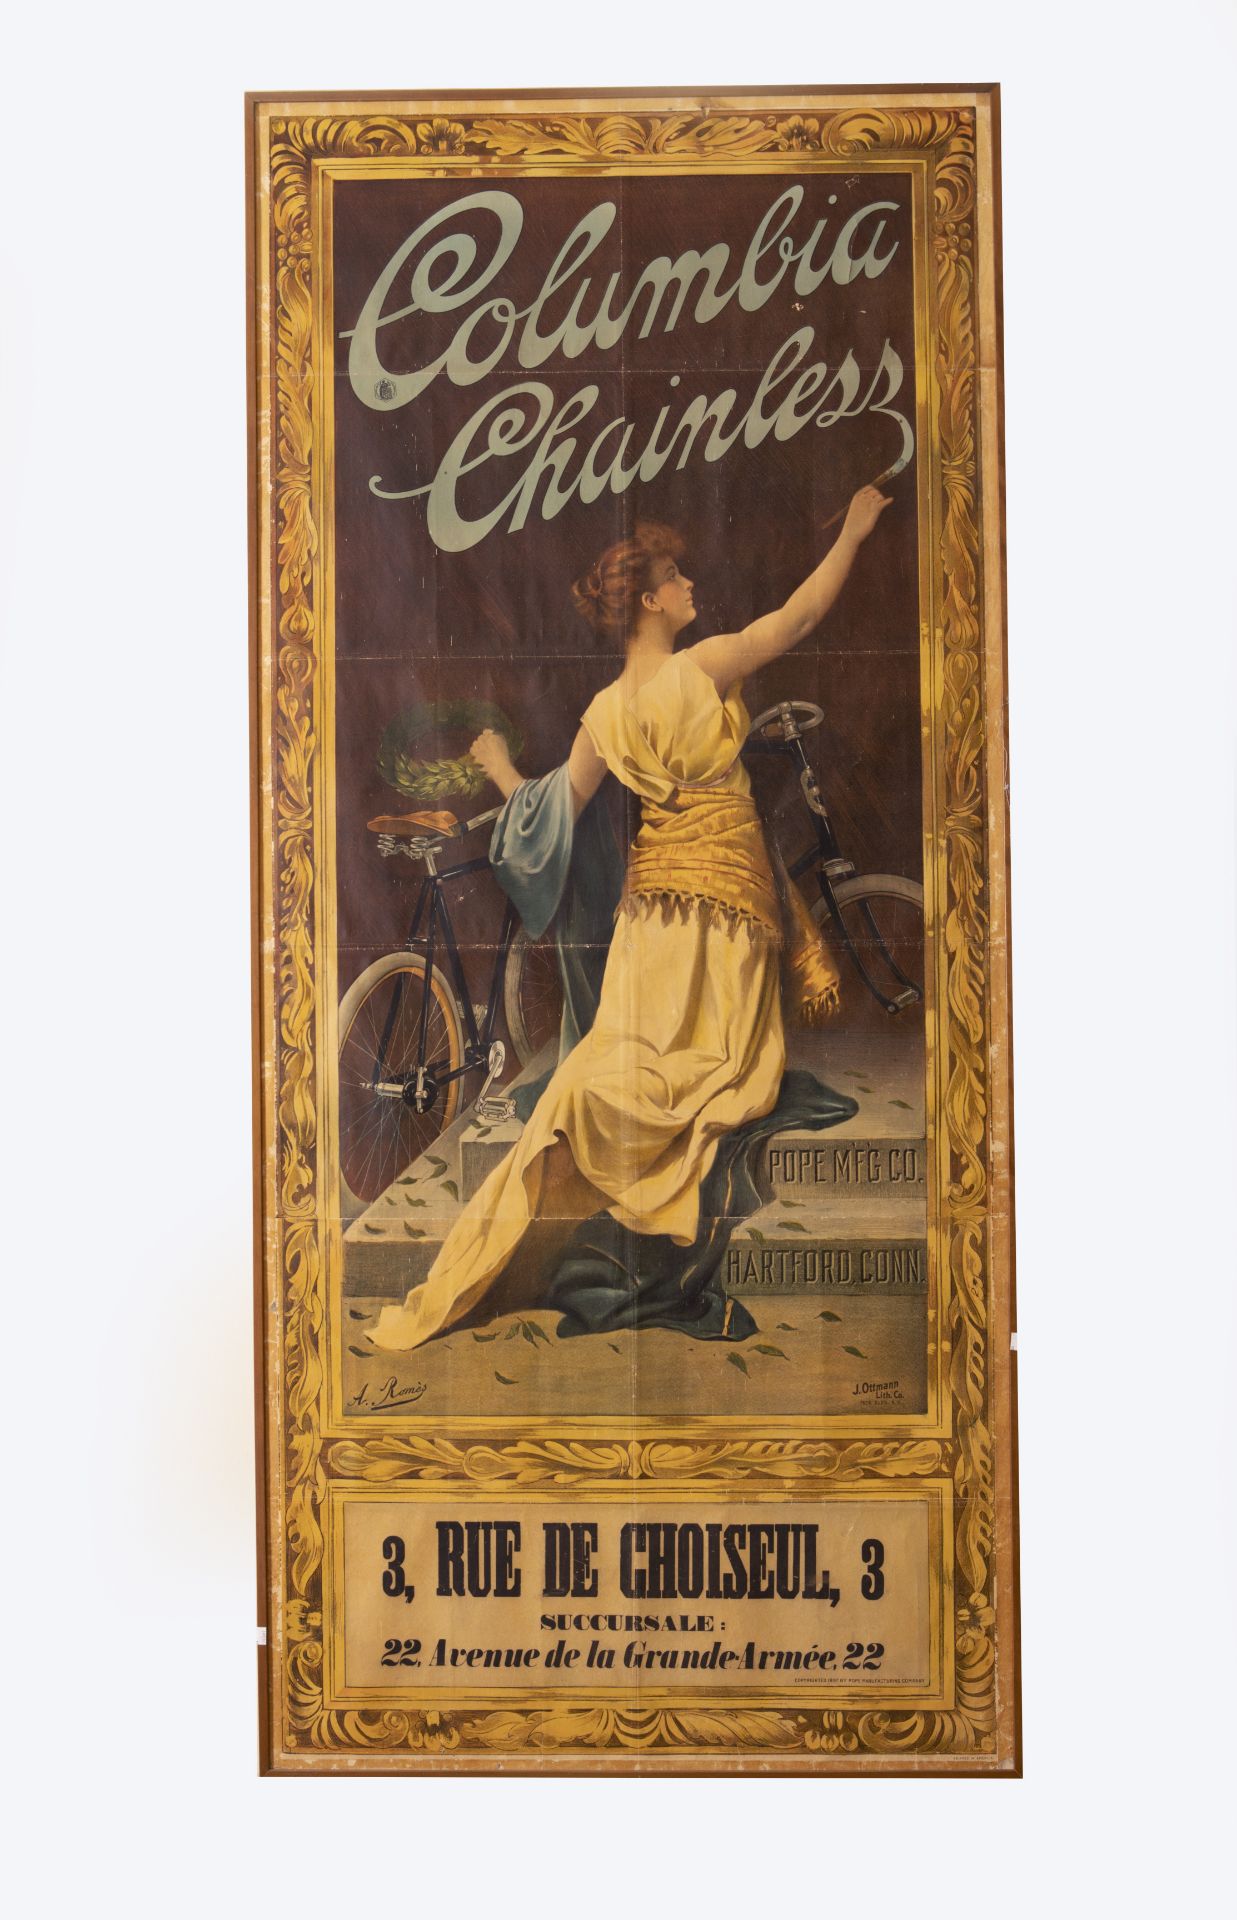 A mounted and framed advertising poster